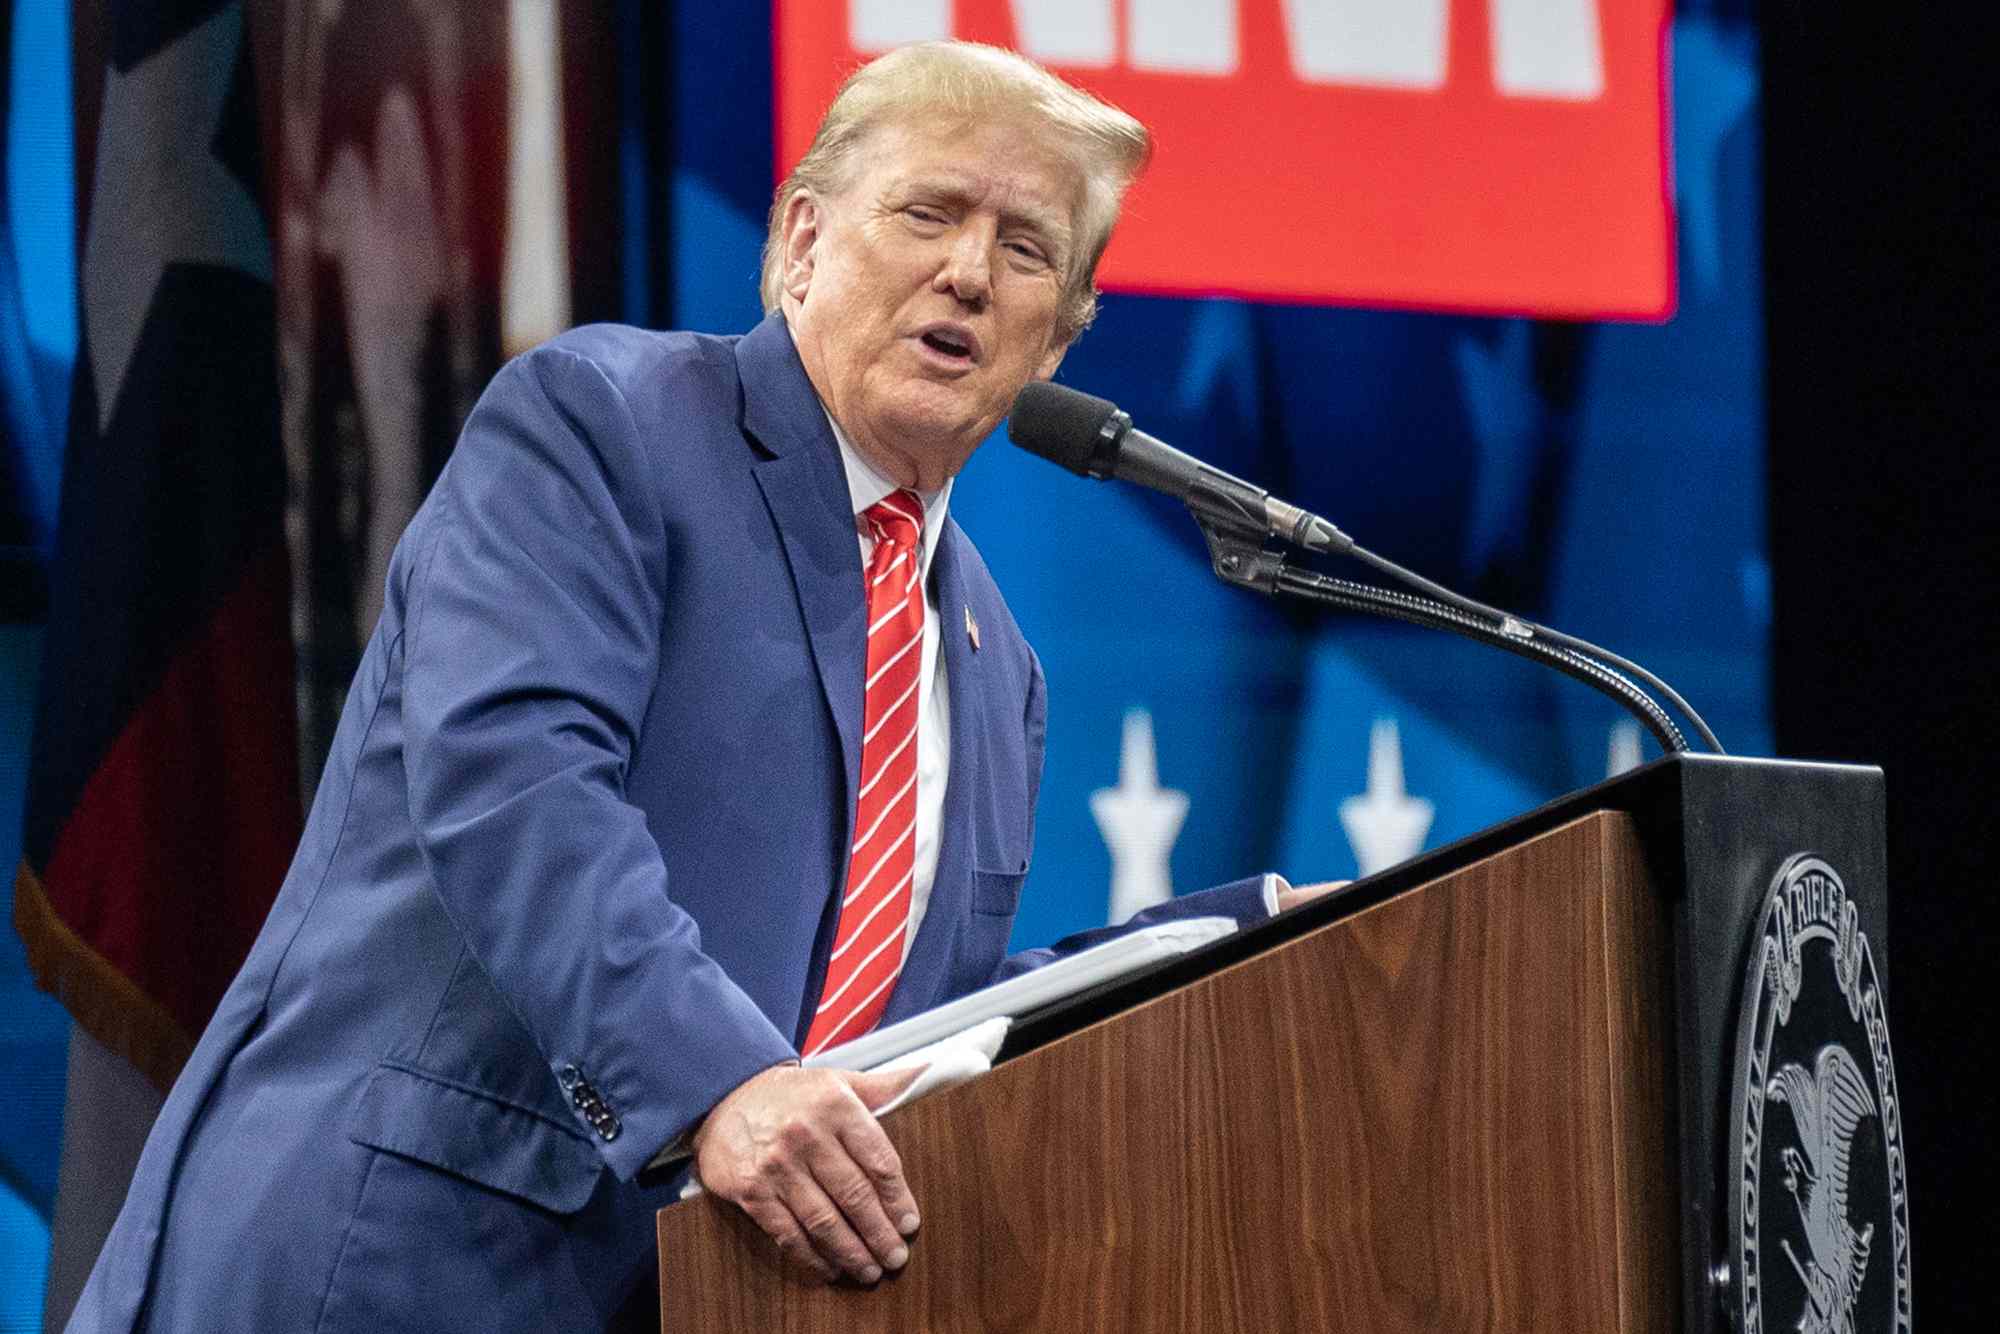 Donald Trump Suggests He Could Be a Three-Term President at NRA Convention